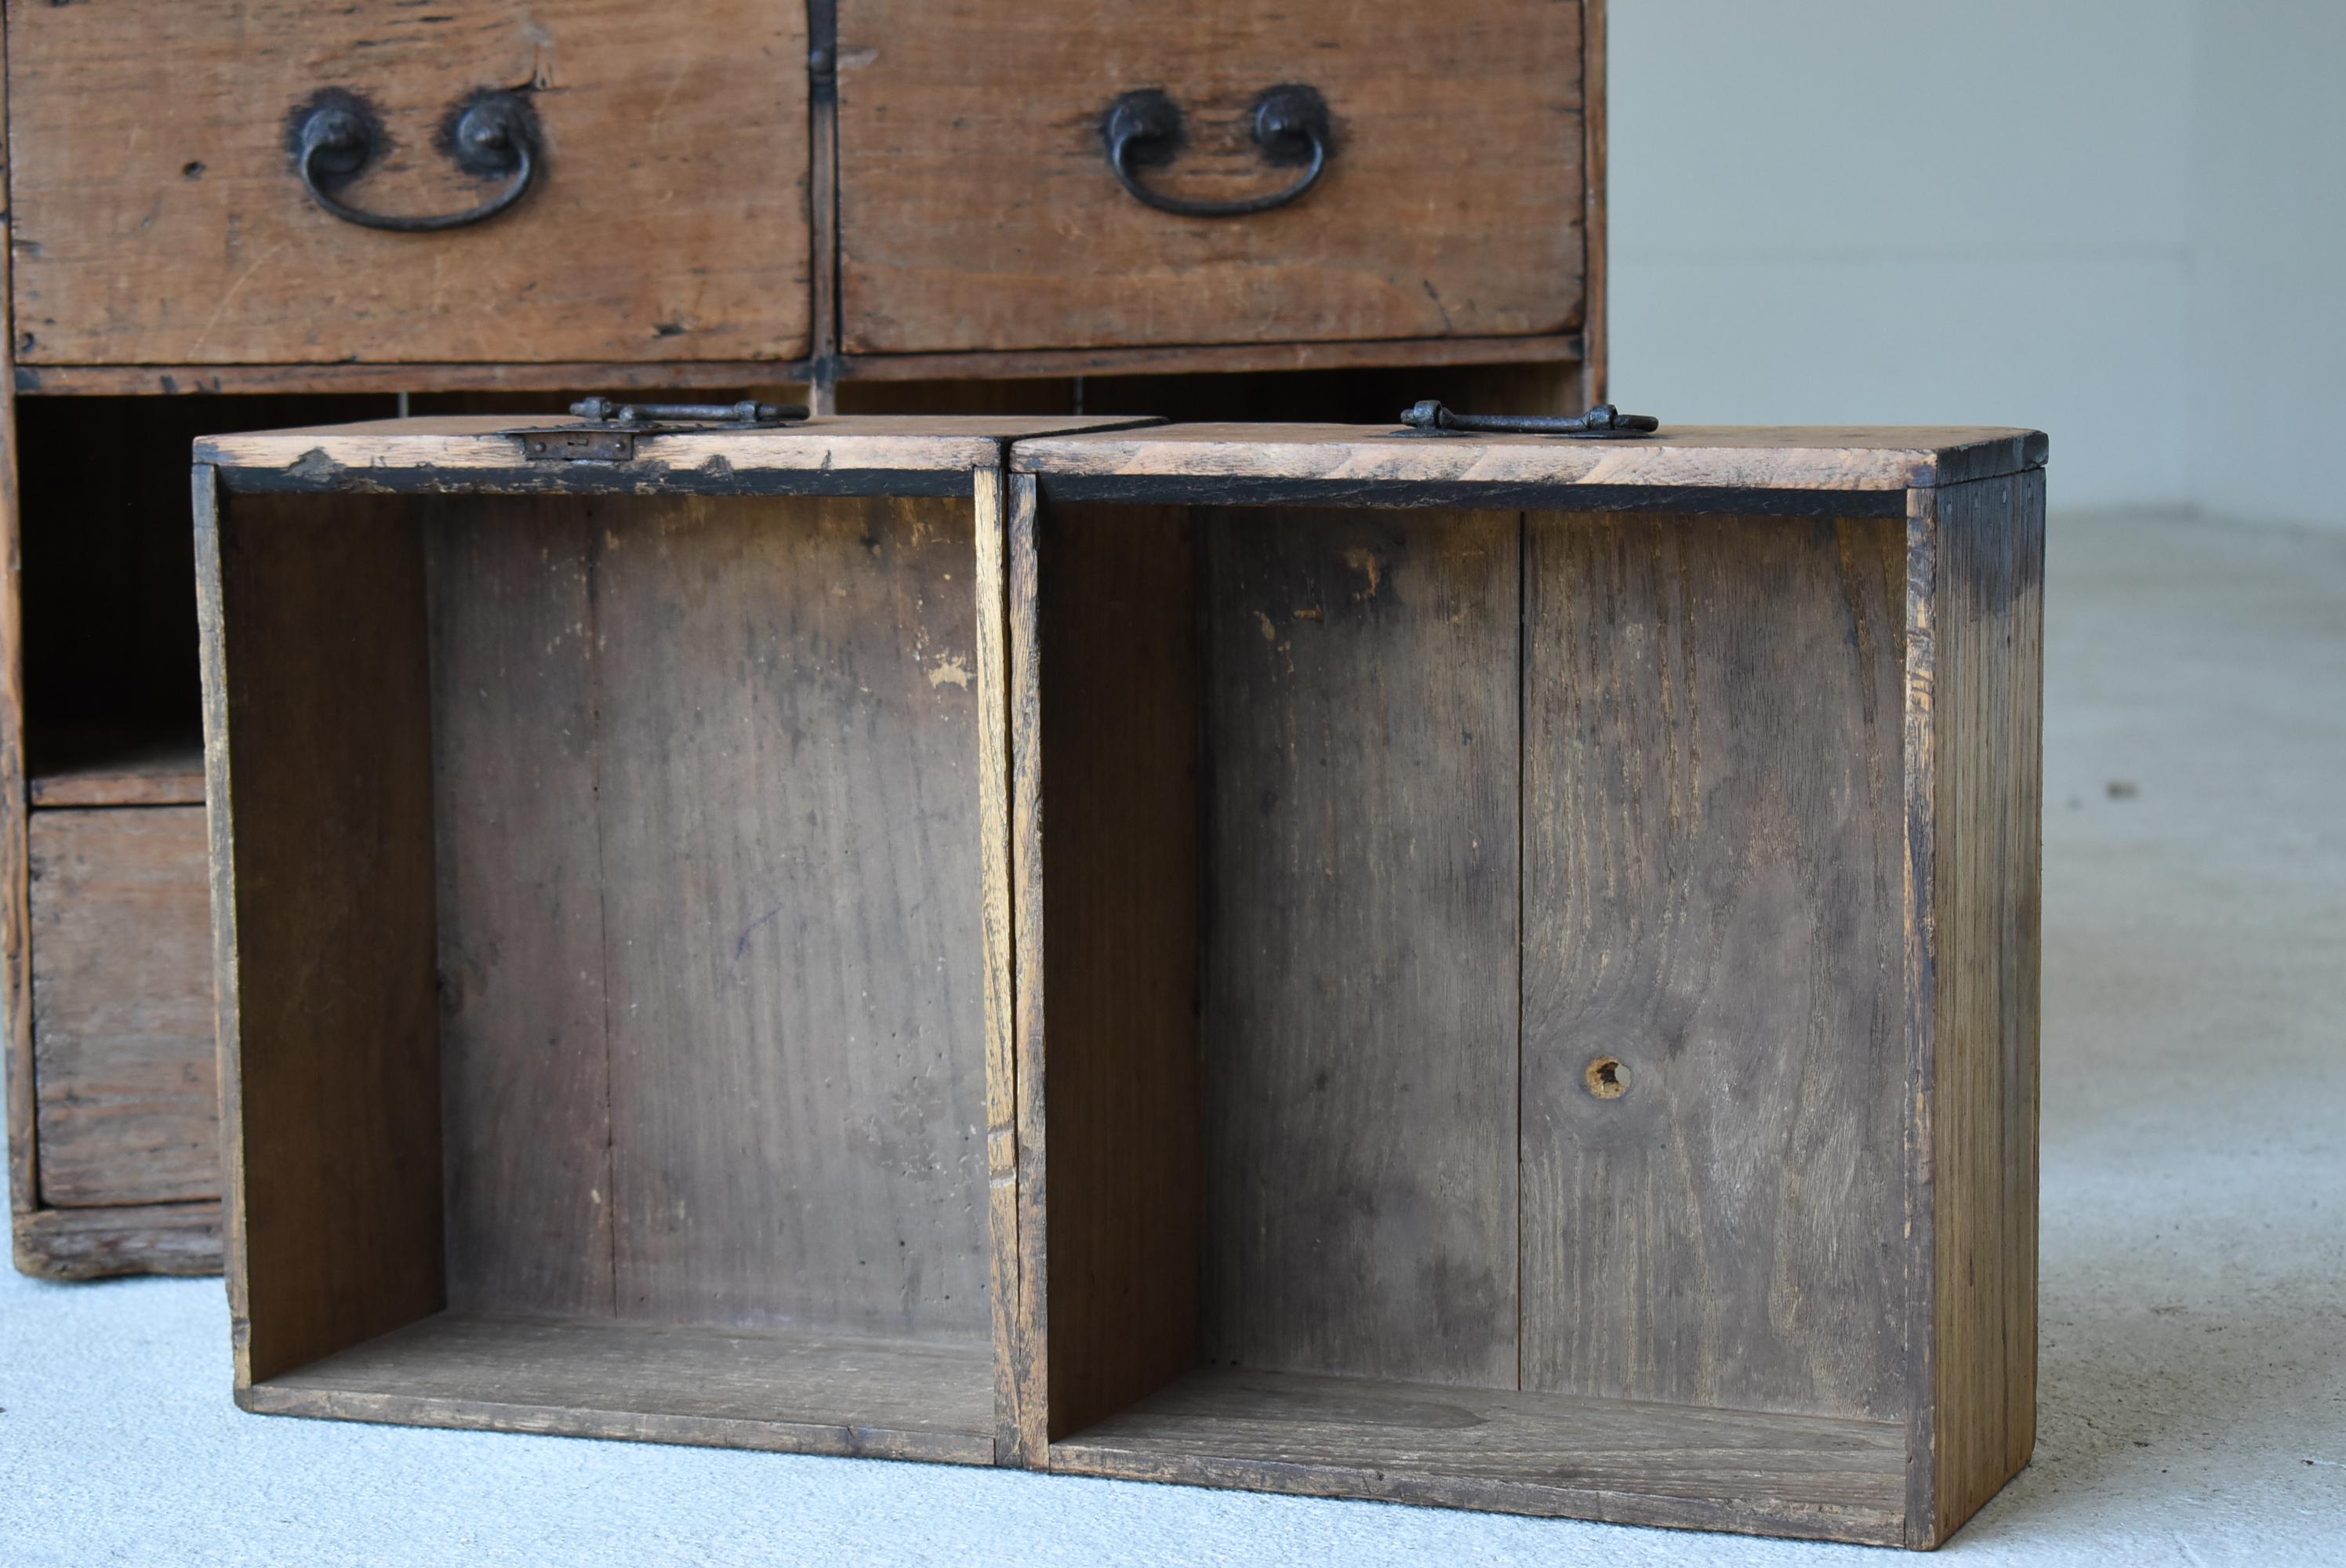 Japanese Antique Chests of Drawers 1860s-1900s /Tansu Storage Mingei Cabinet 3